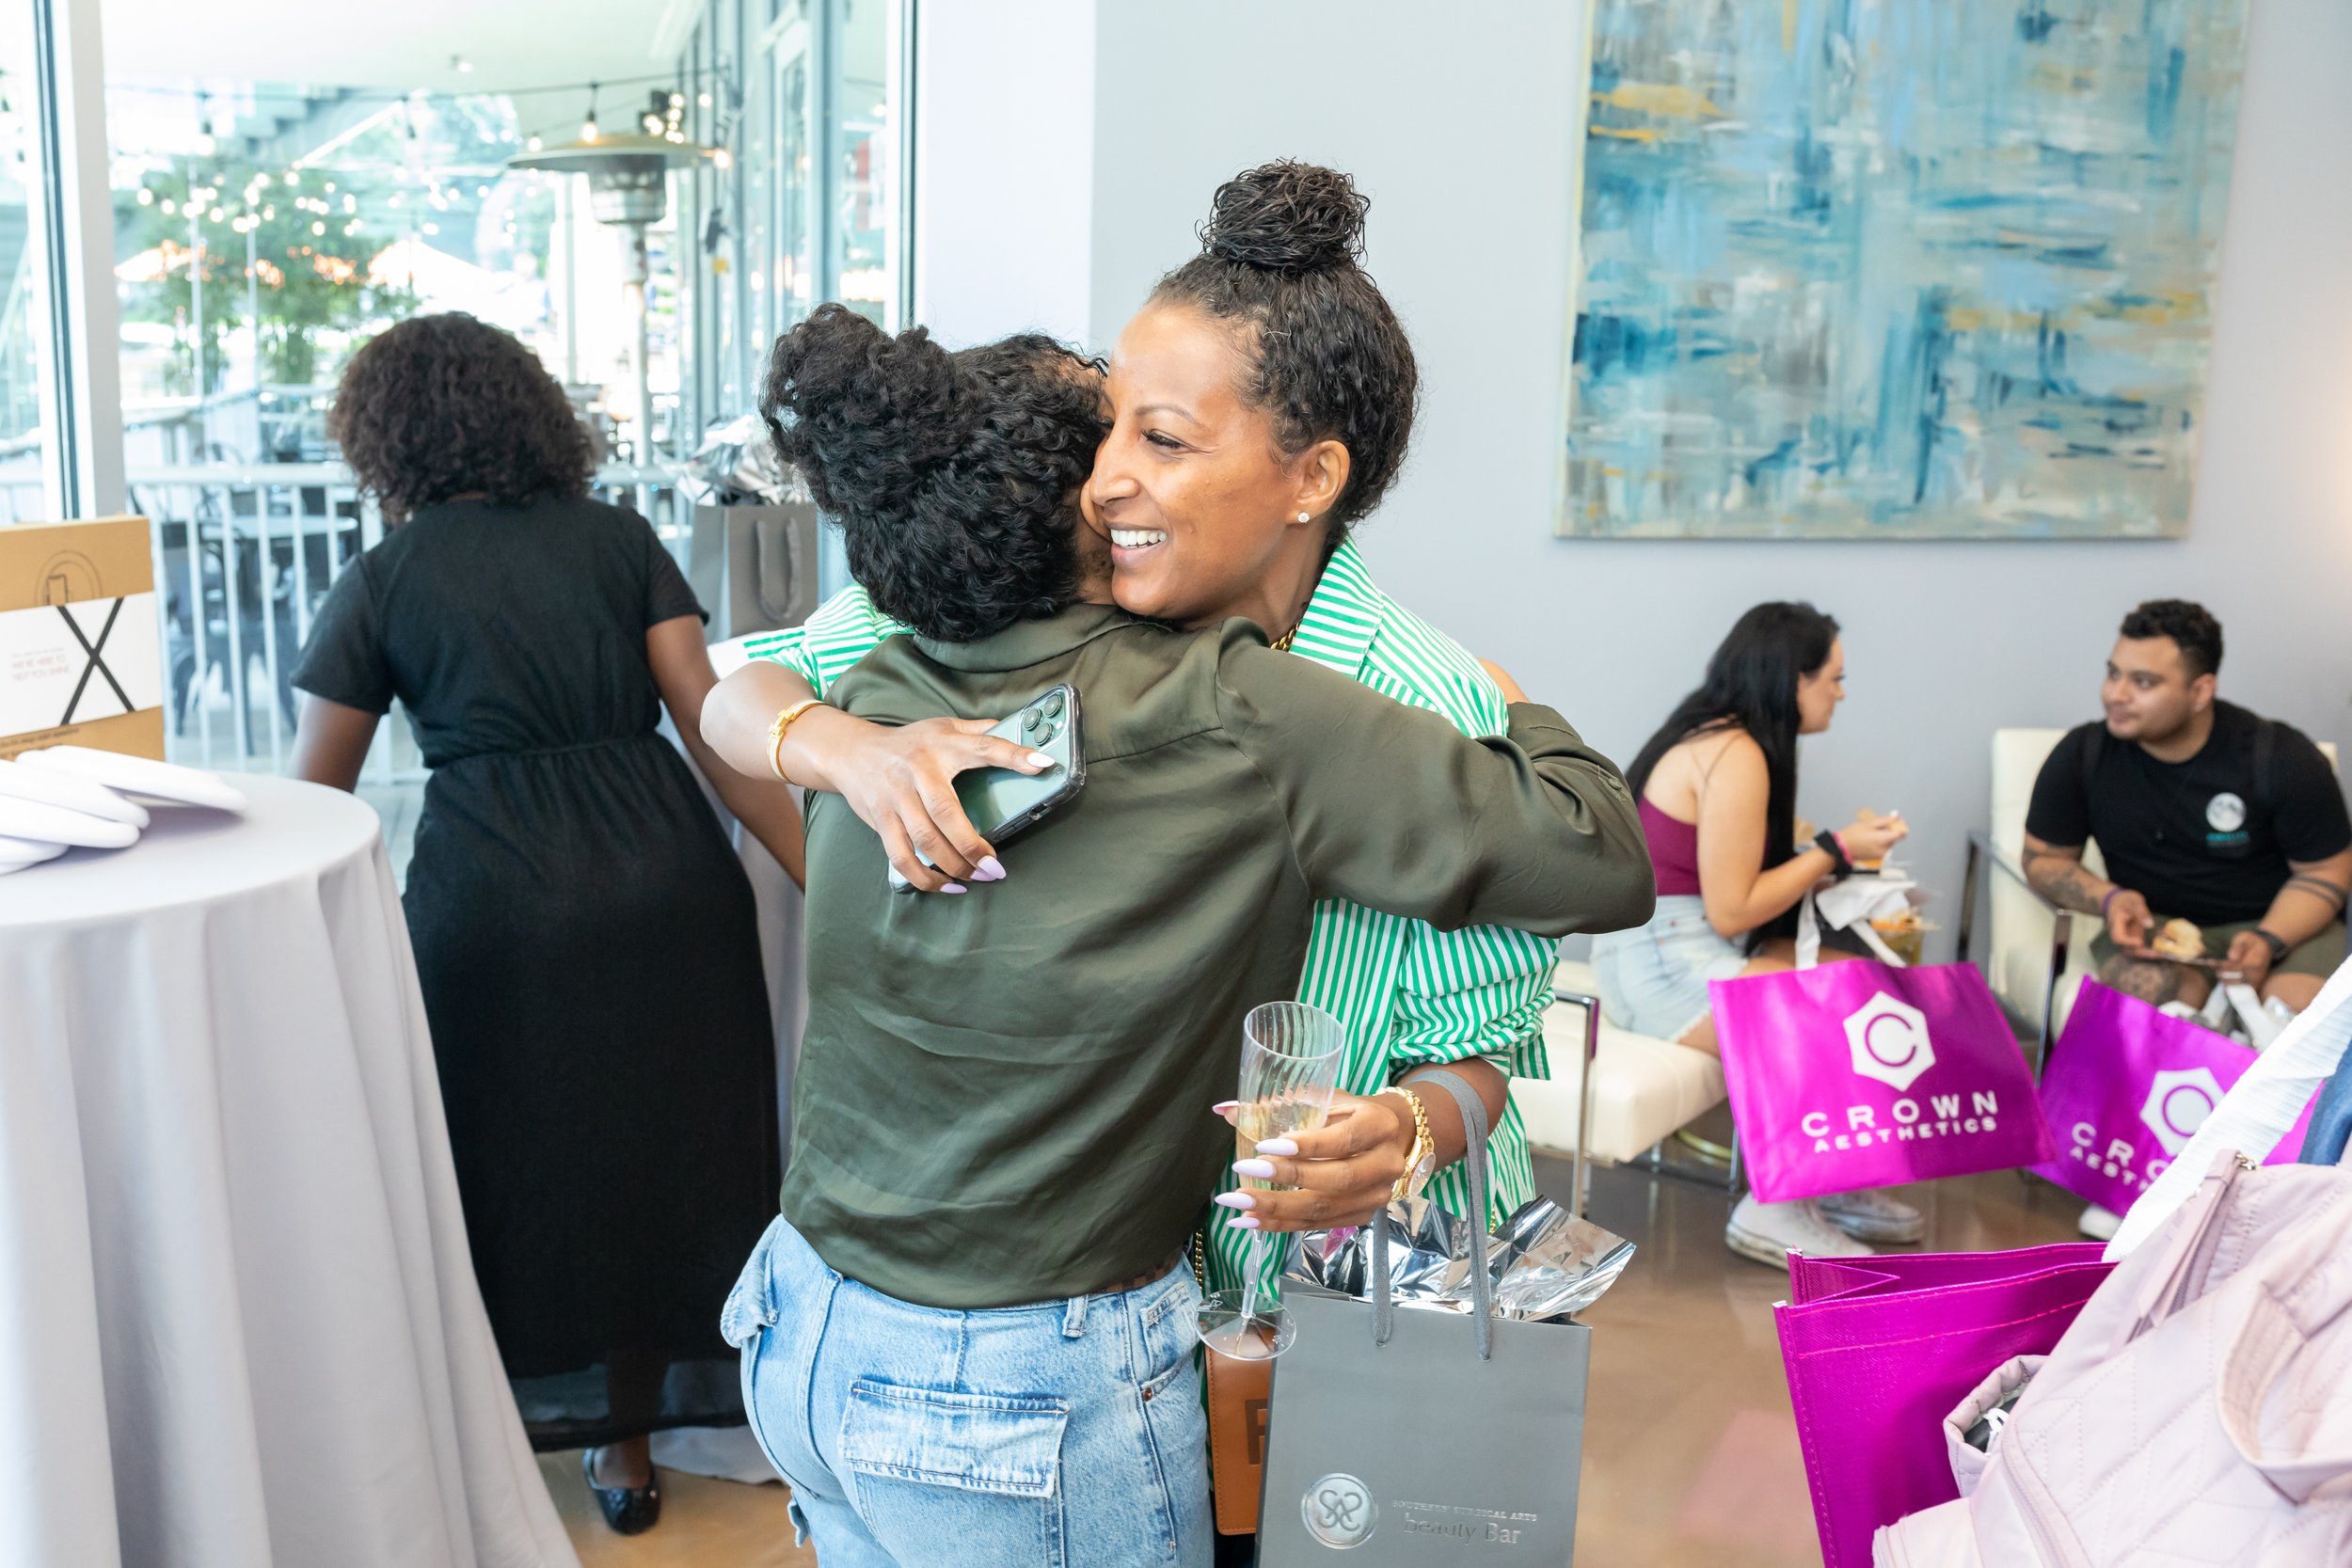 20230817-The Luxe List Atlanta-Southern Surgical Arts Beauty Bar Grand Opening-THU-BC-033.jpg (Copy) (Copy)